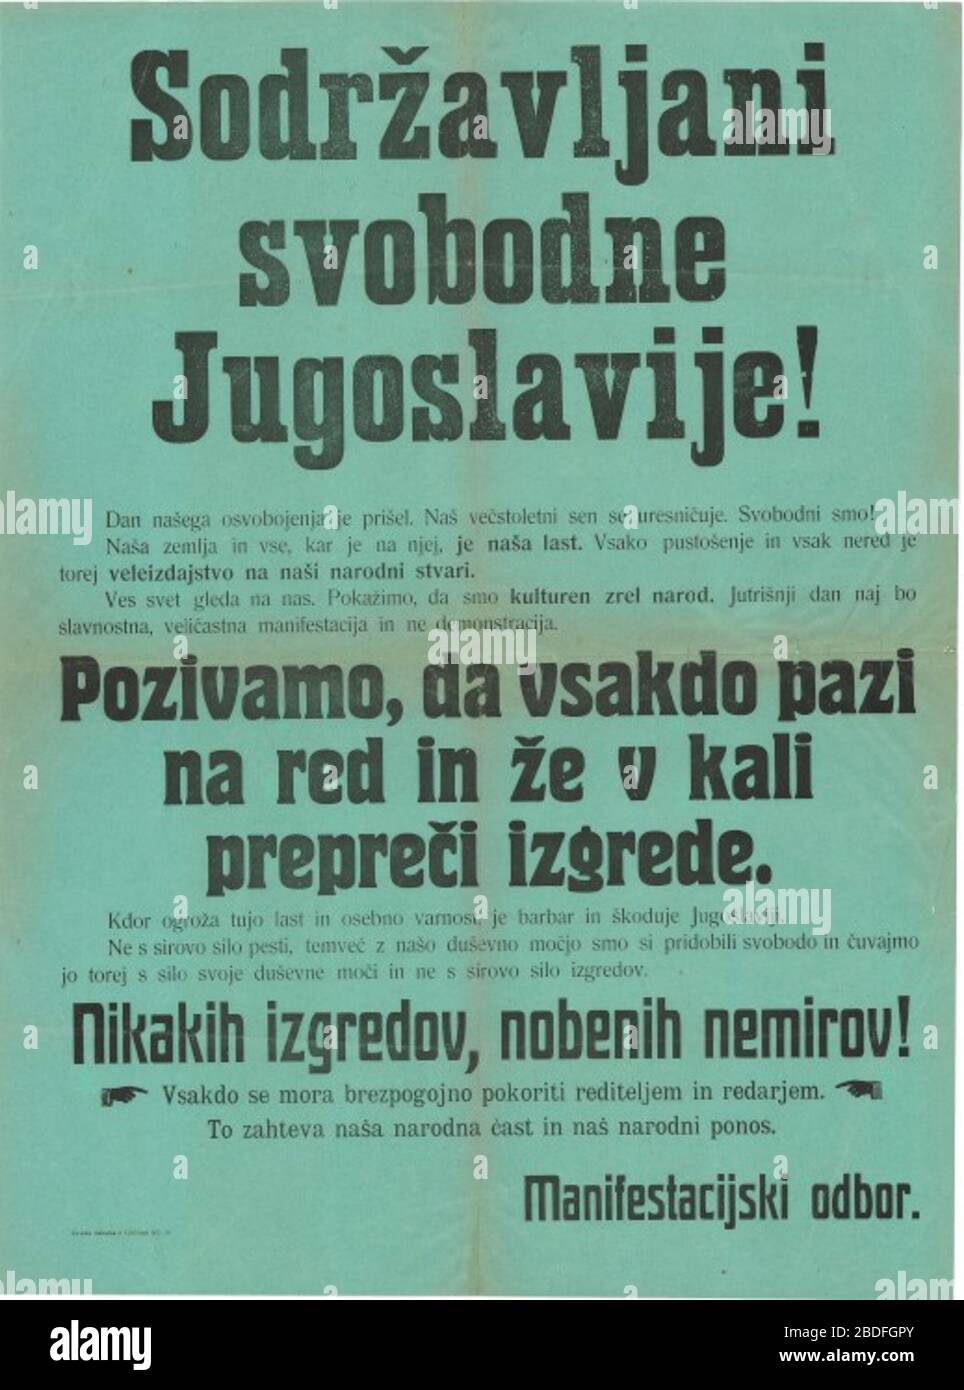 Slovenščina: Plakat Sodržavljani svobodne Jugoslavije!; 1918; This image is available from the Digital Library of Slovenia reference number 4JC9IR2D This tag not the copyright status of the attached